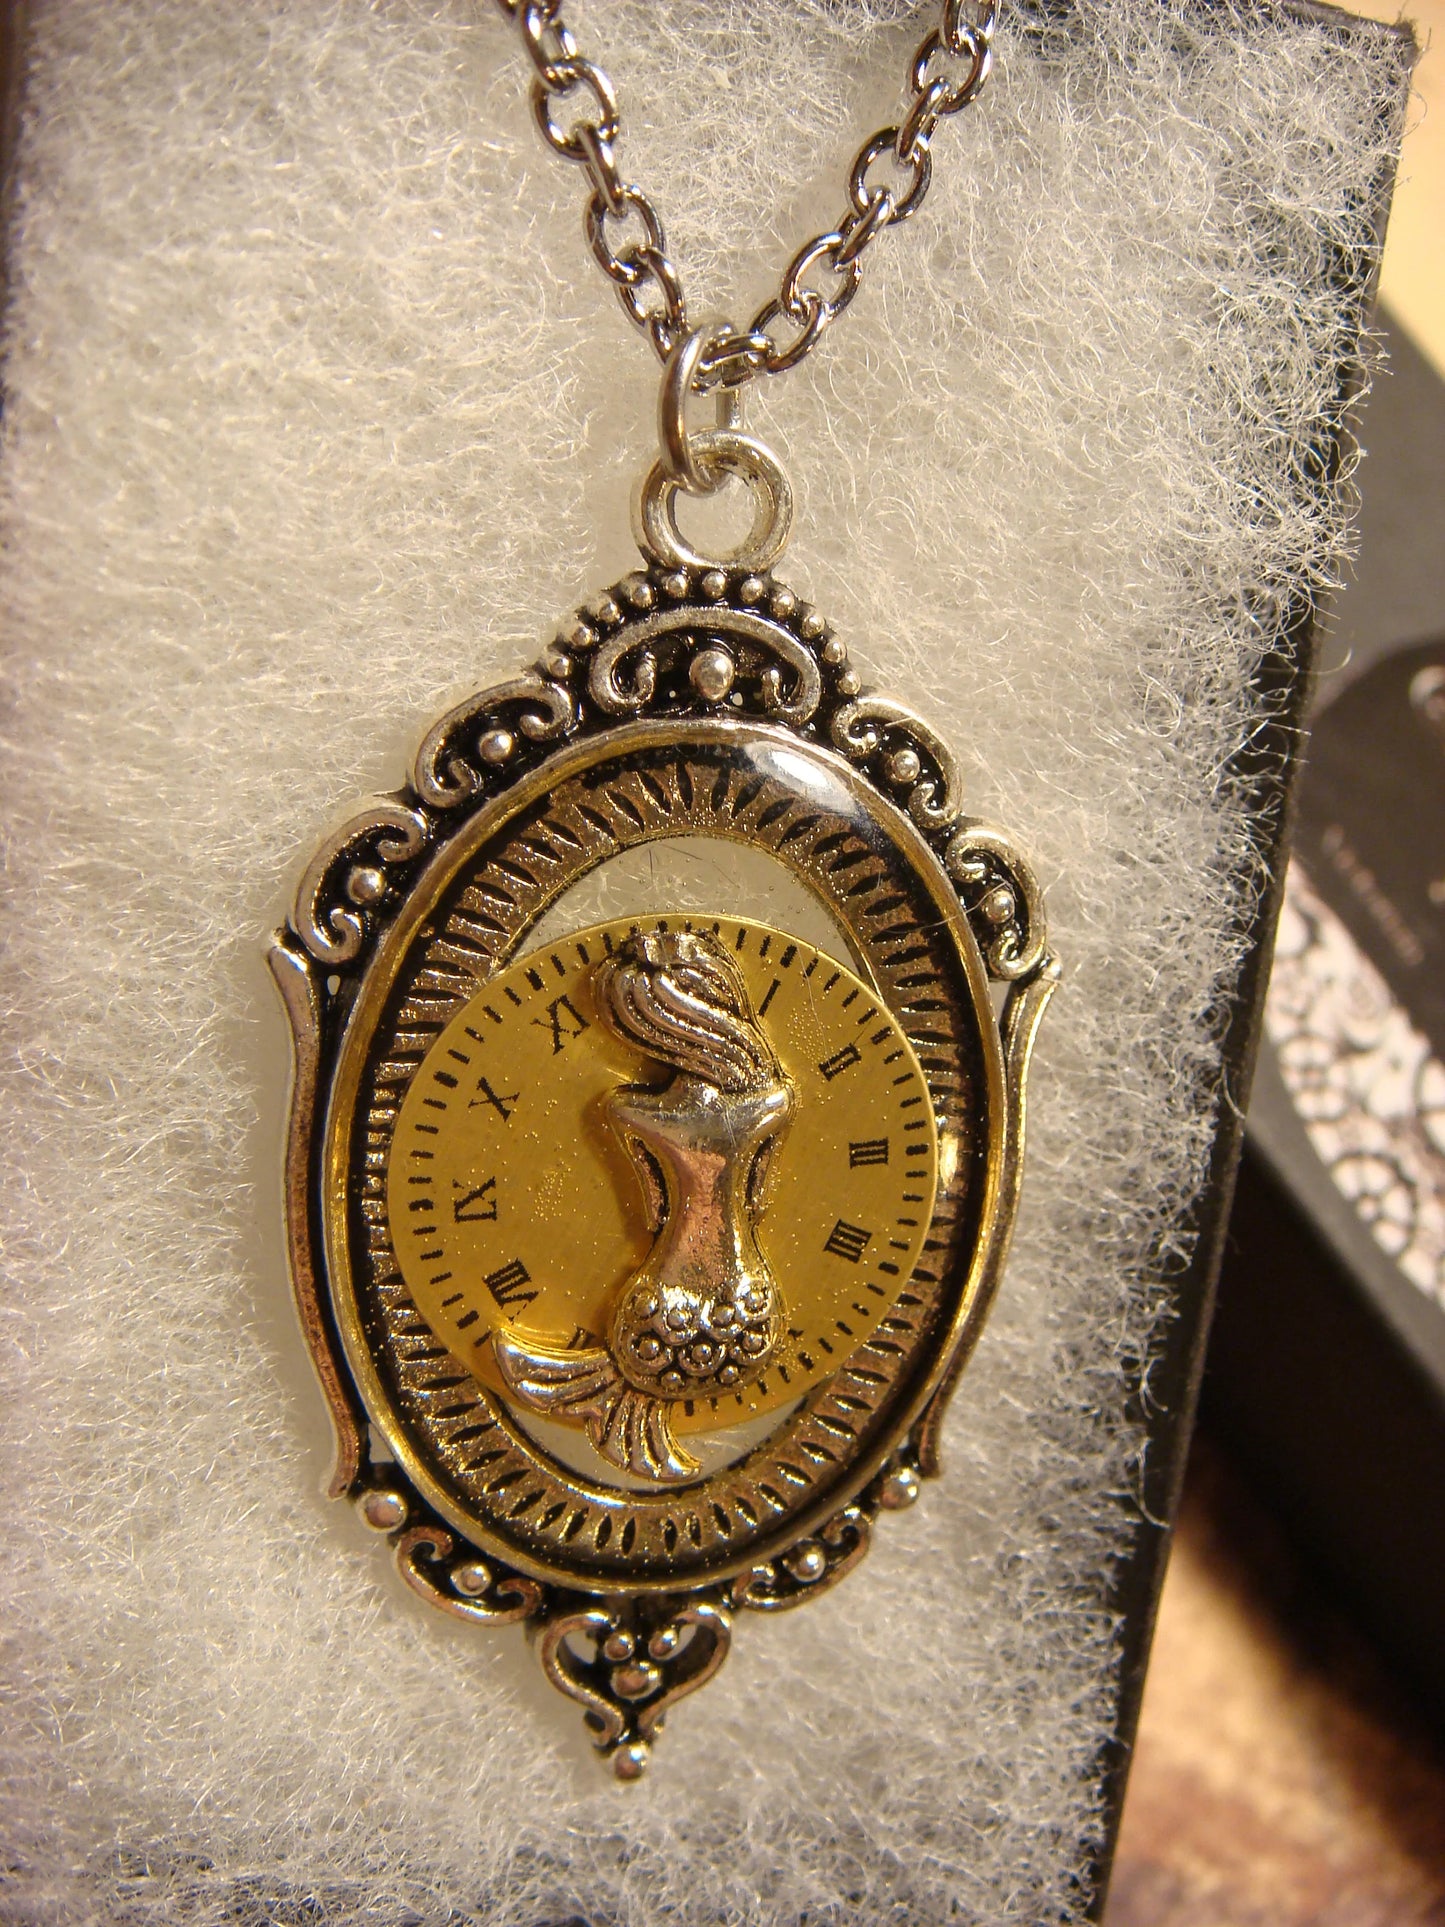 Mermaid with Watch Face in See-thru Ornate Necklace